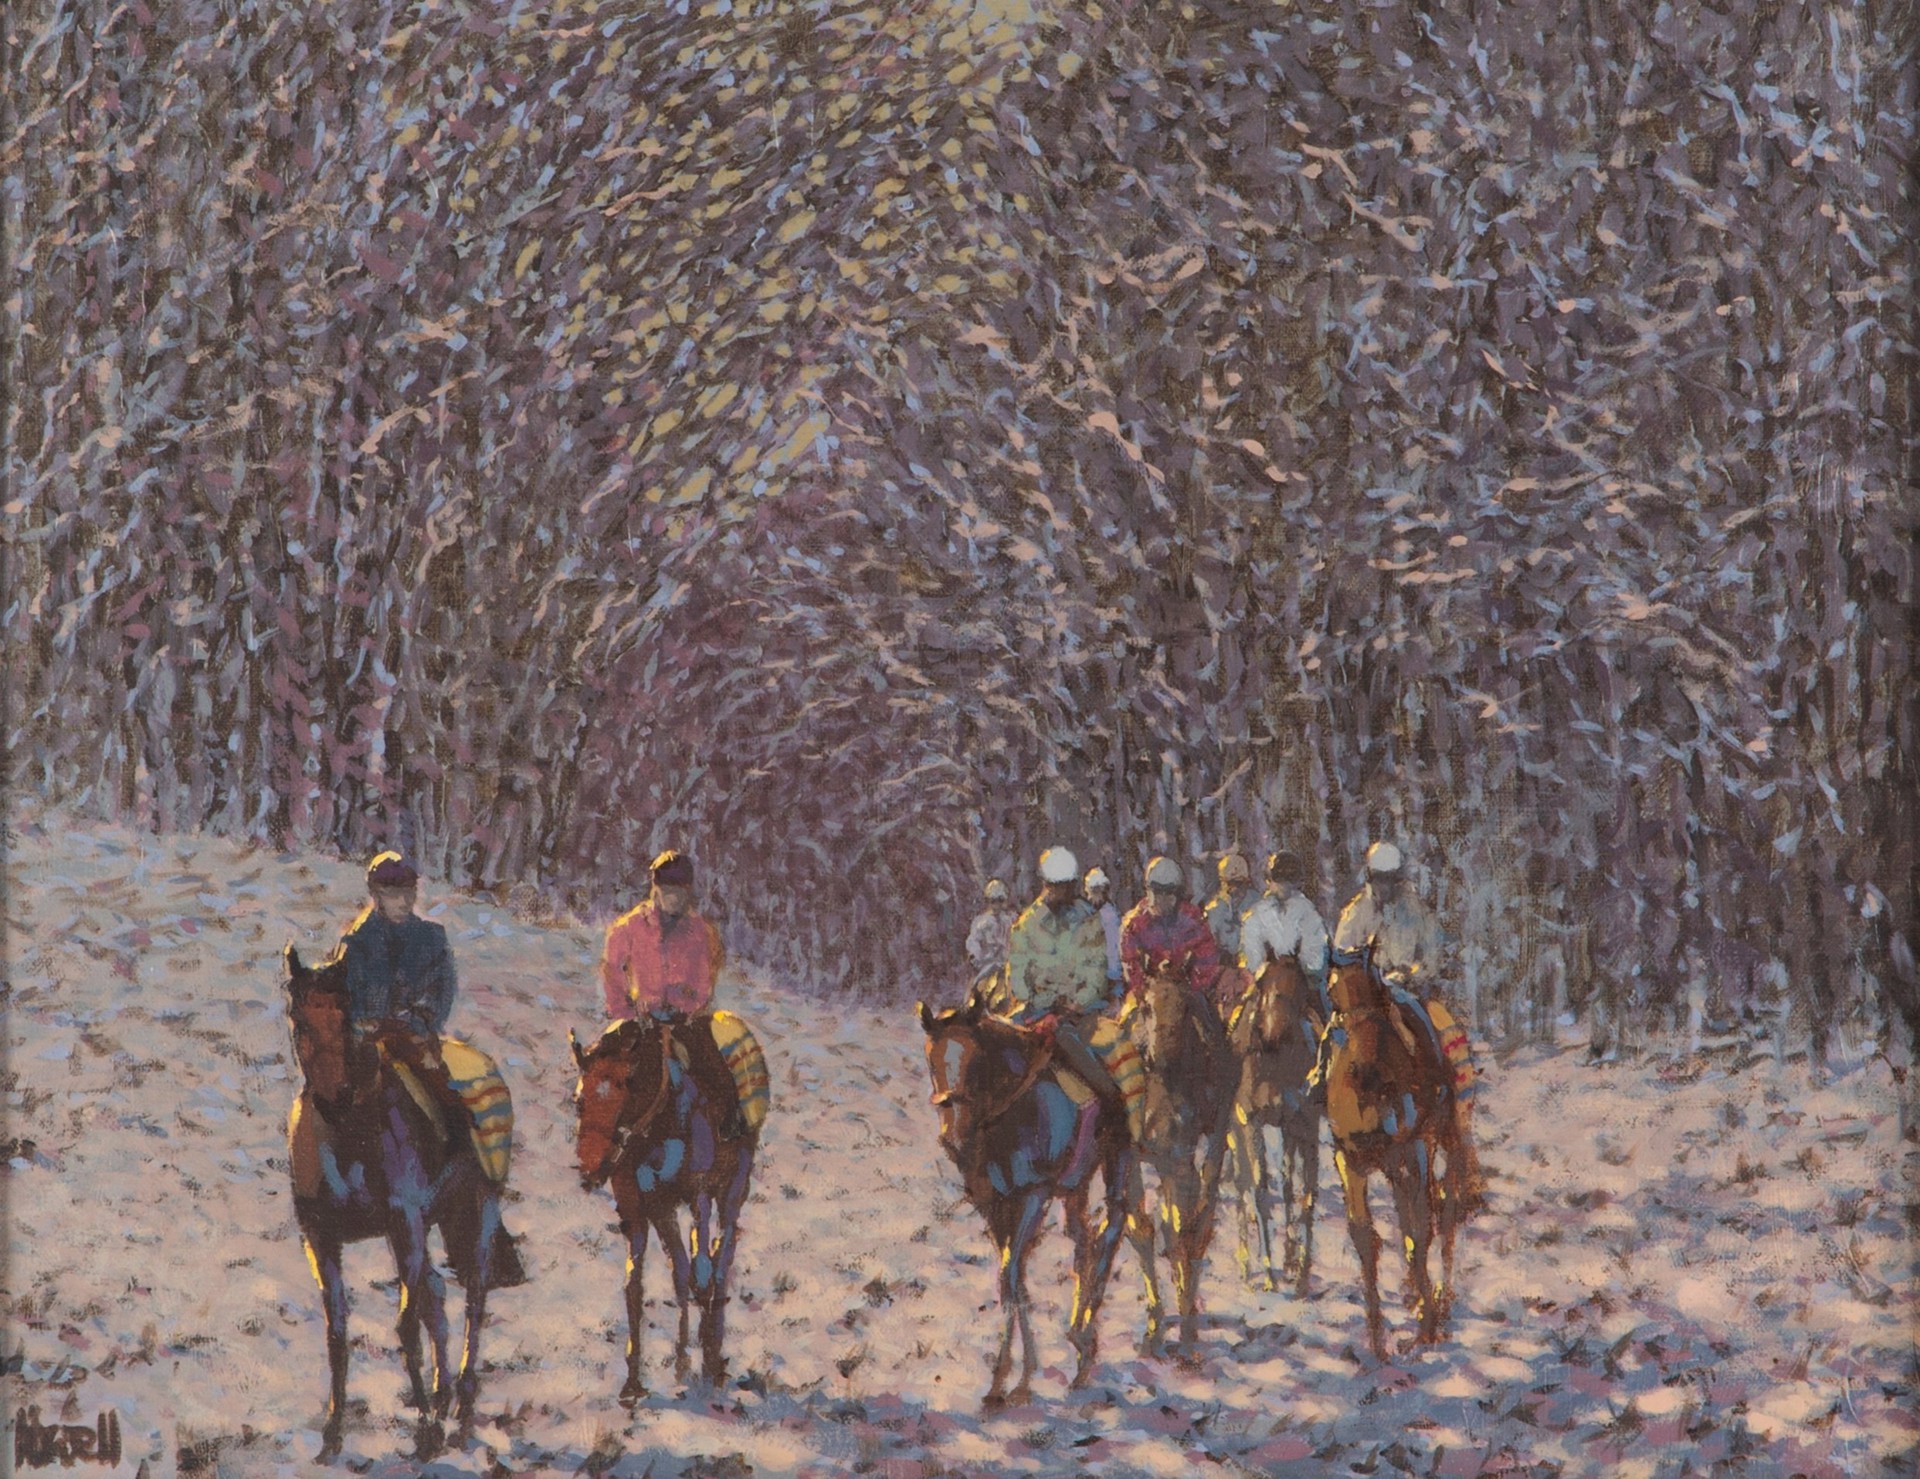 Heading to the Gallops - Winter by Peter Howell